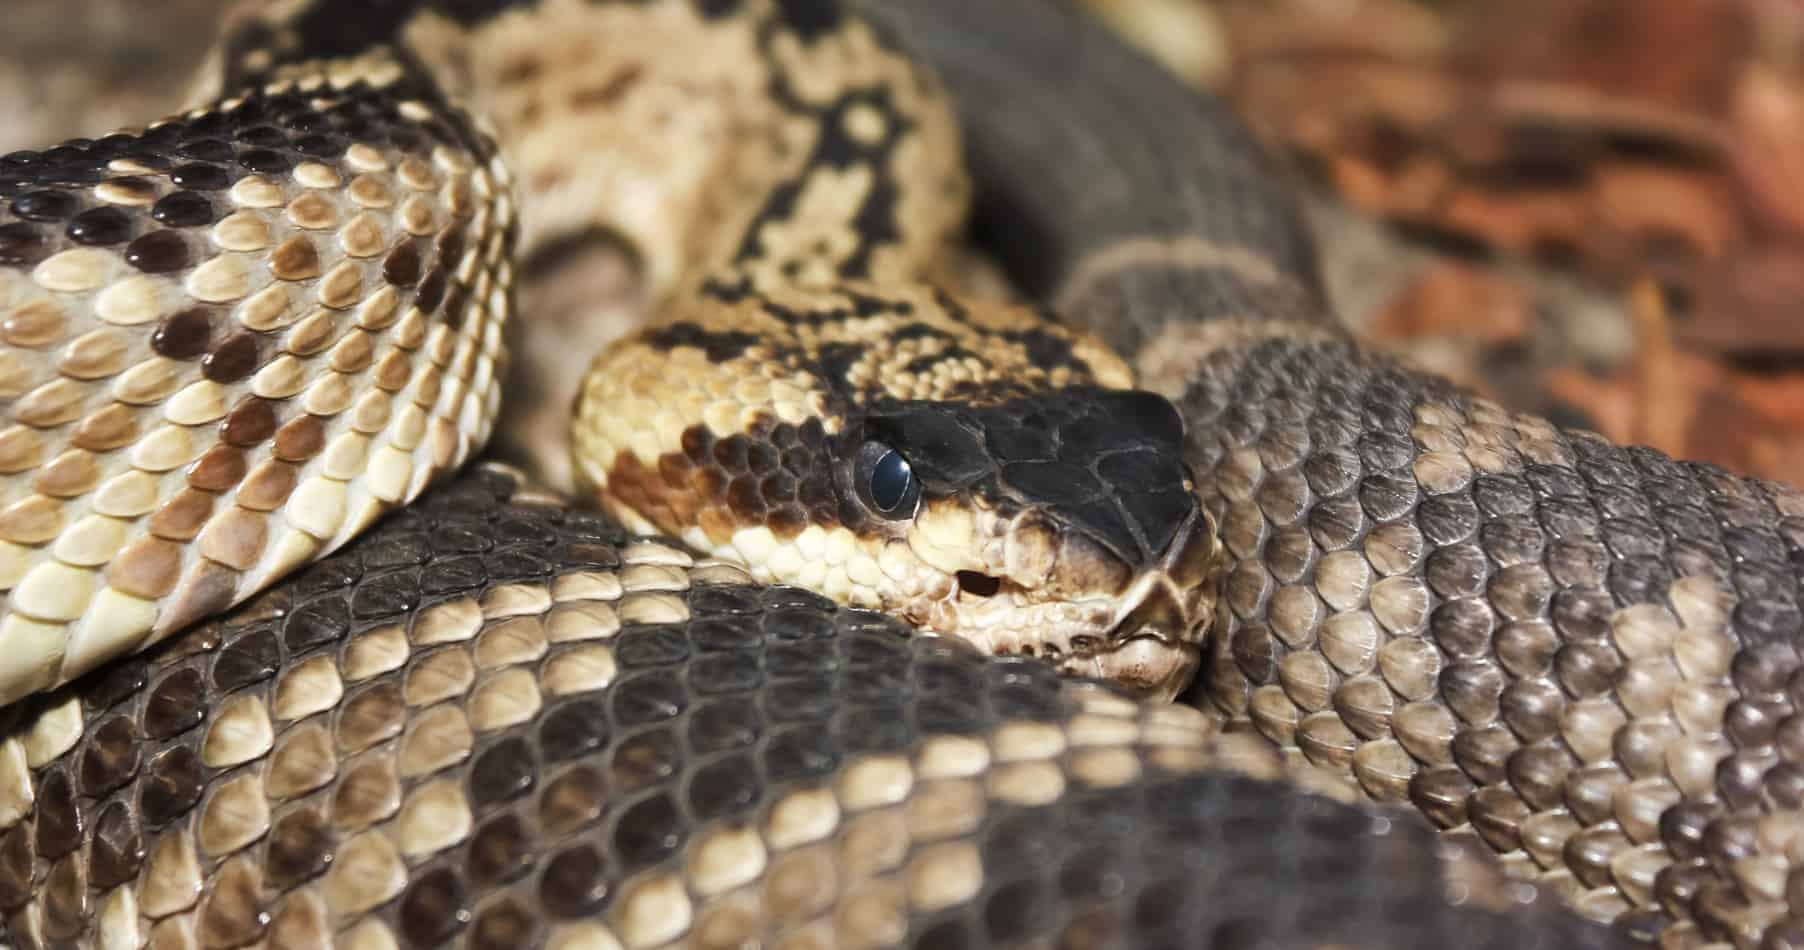 most venomous snake in the US 7 The Most Venomous Snake in the U.S. (With Bite Facts and Pictures)